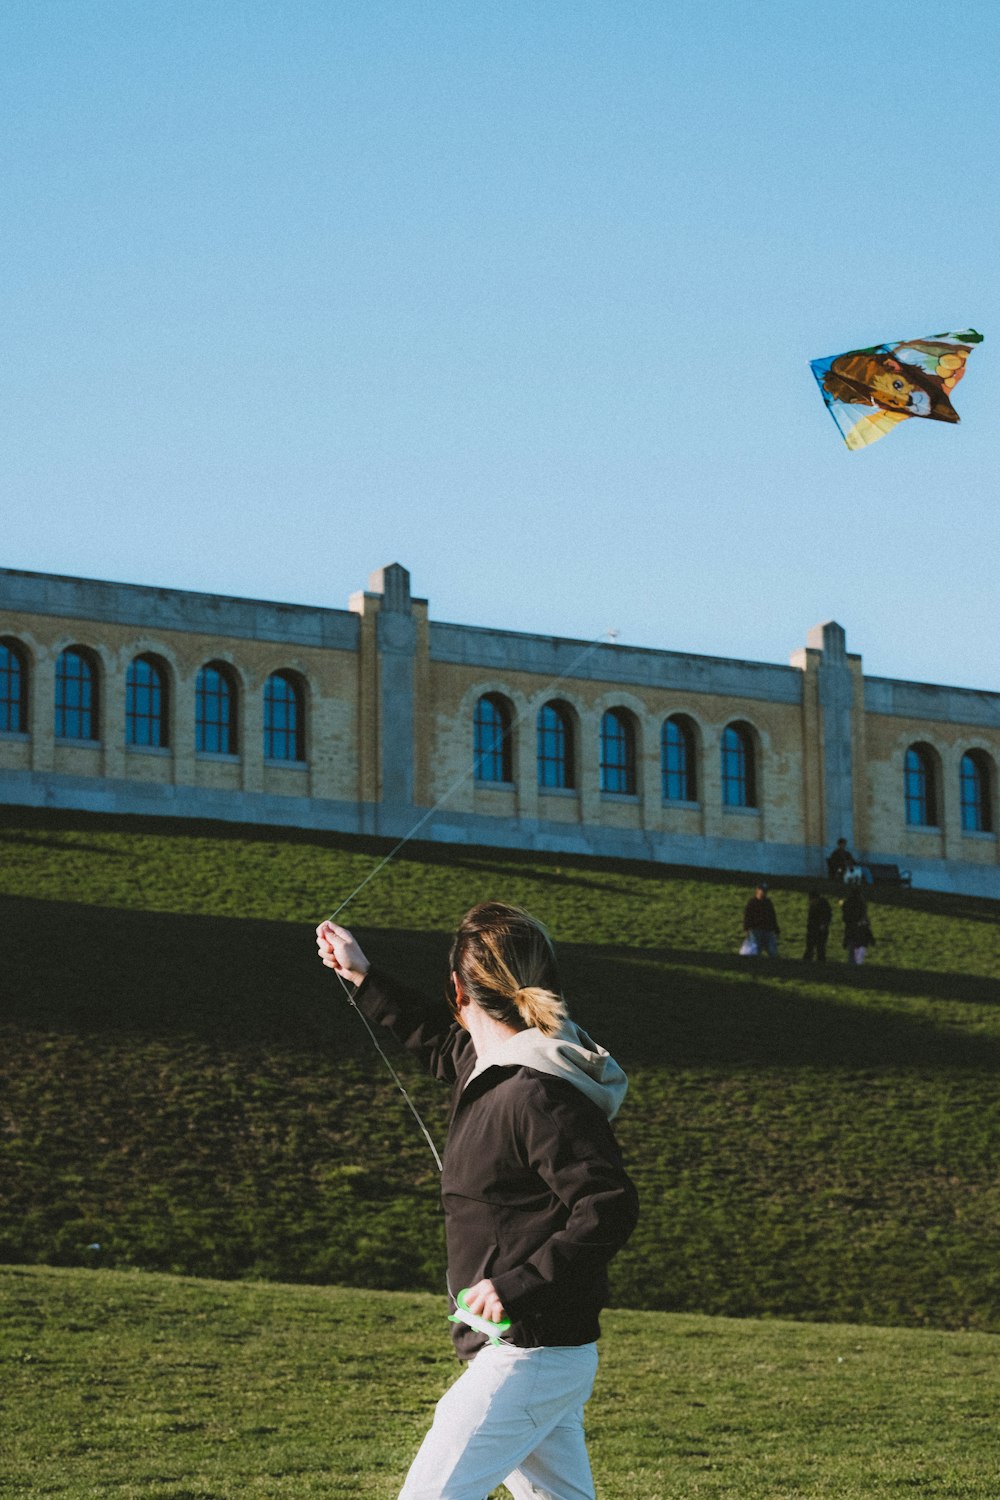 a woman is flying a kite in a field